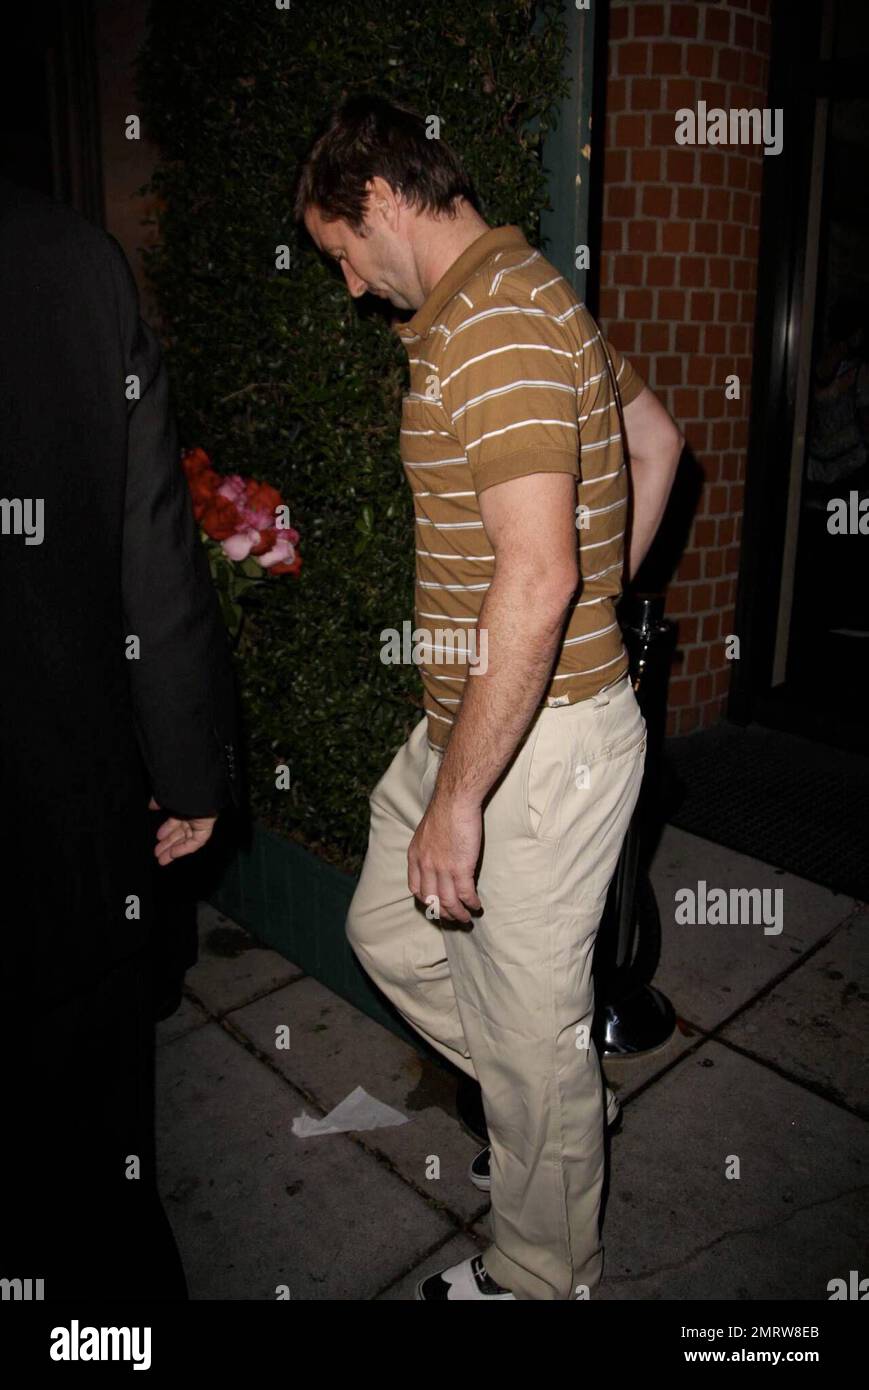 Luke Wilson leaves the restaurant Mr. Chow after having dinner and sitting for a bit with Steve Tisch and his daughter. He does his best to keep his head down and completely covers up once in the waiting SUV. Could Luke have been meeting Tisch about being cast in an upcoming film? Los Angeles, CA. 9/24/08. Stock Photo